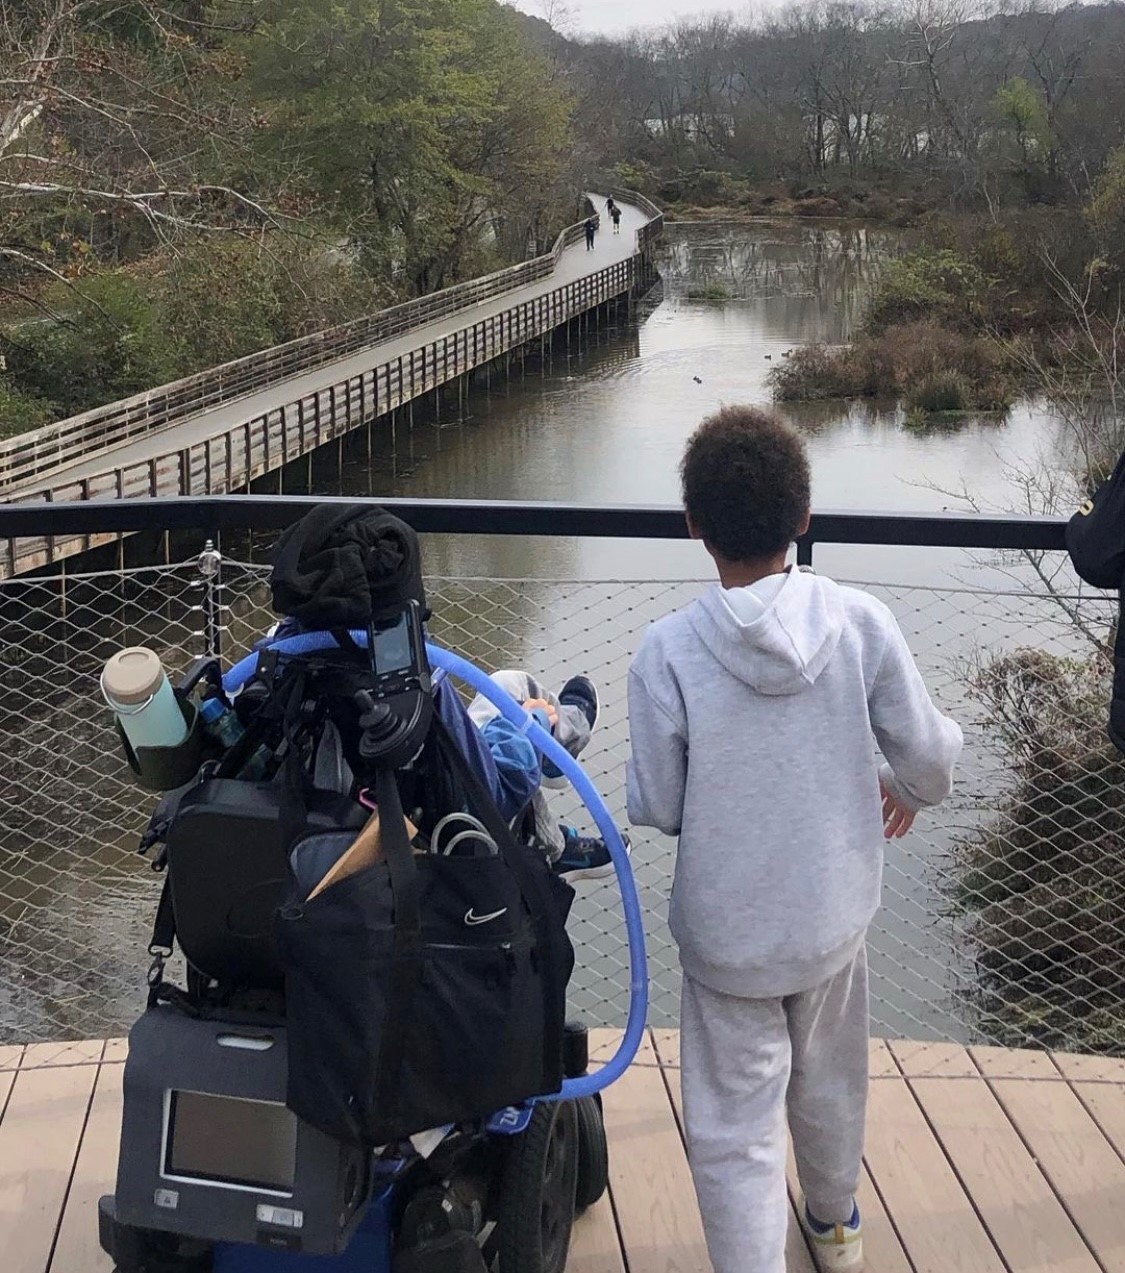 “The river boardwalk trail made it possible for my student with accessibility challenges to experience the wetlands and river in the same manner as his classmates. The CNC team did an amazing job accommodating his needs and making it fun and interesting for the entire class.”
– 2nd Grade Teacher